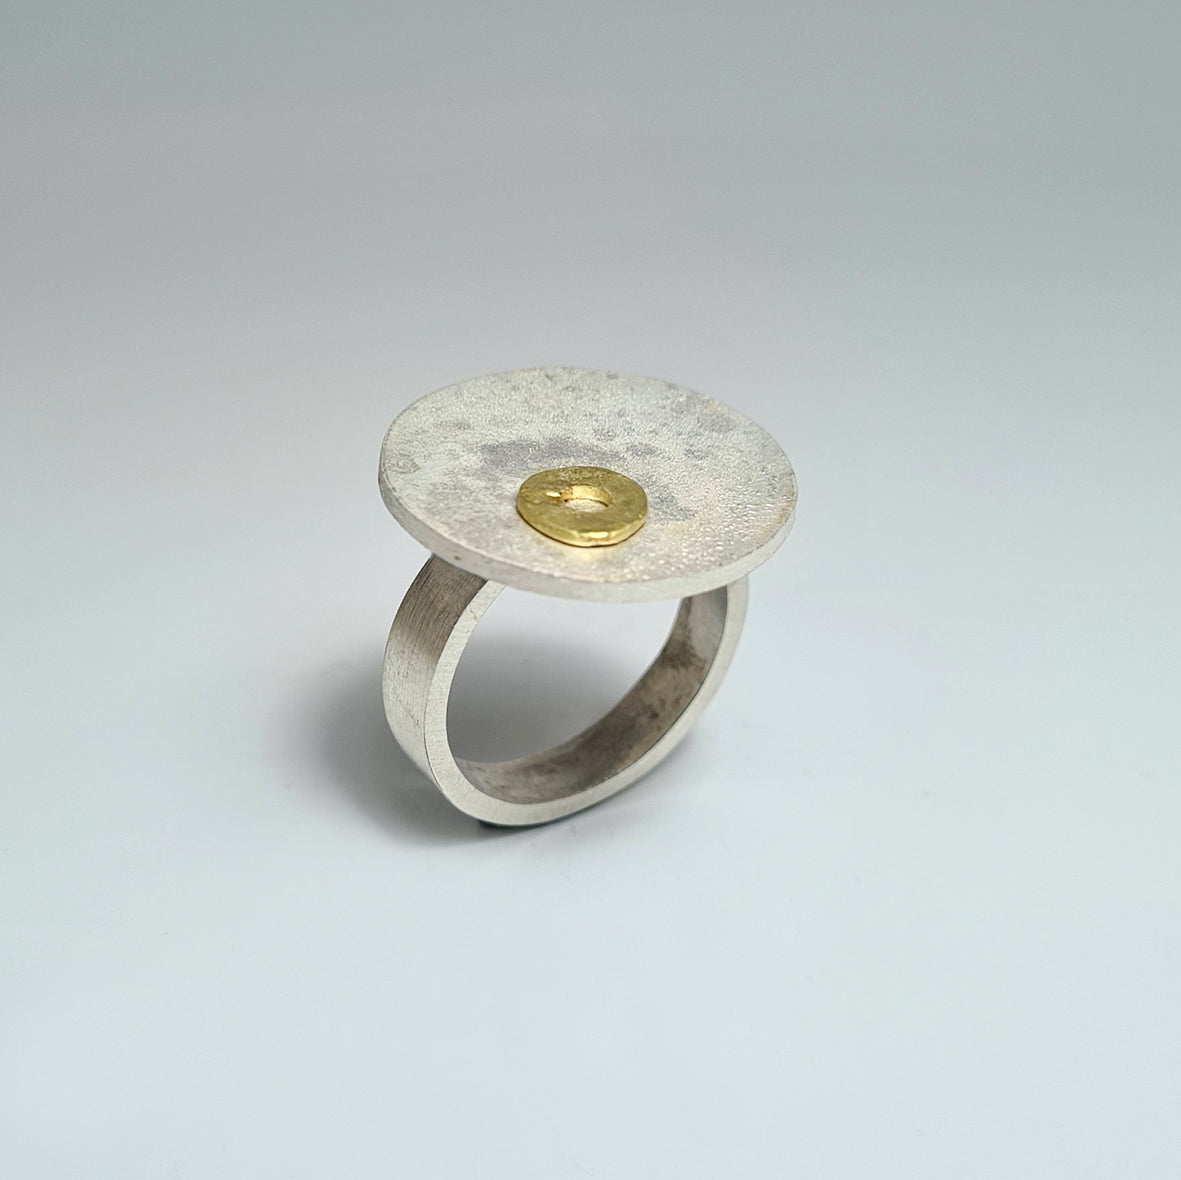 Ring O of the imProvisada collection